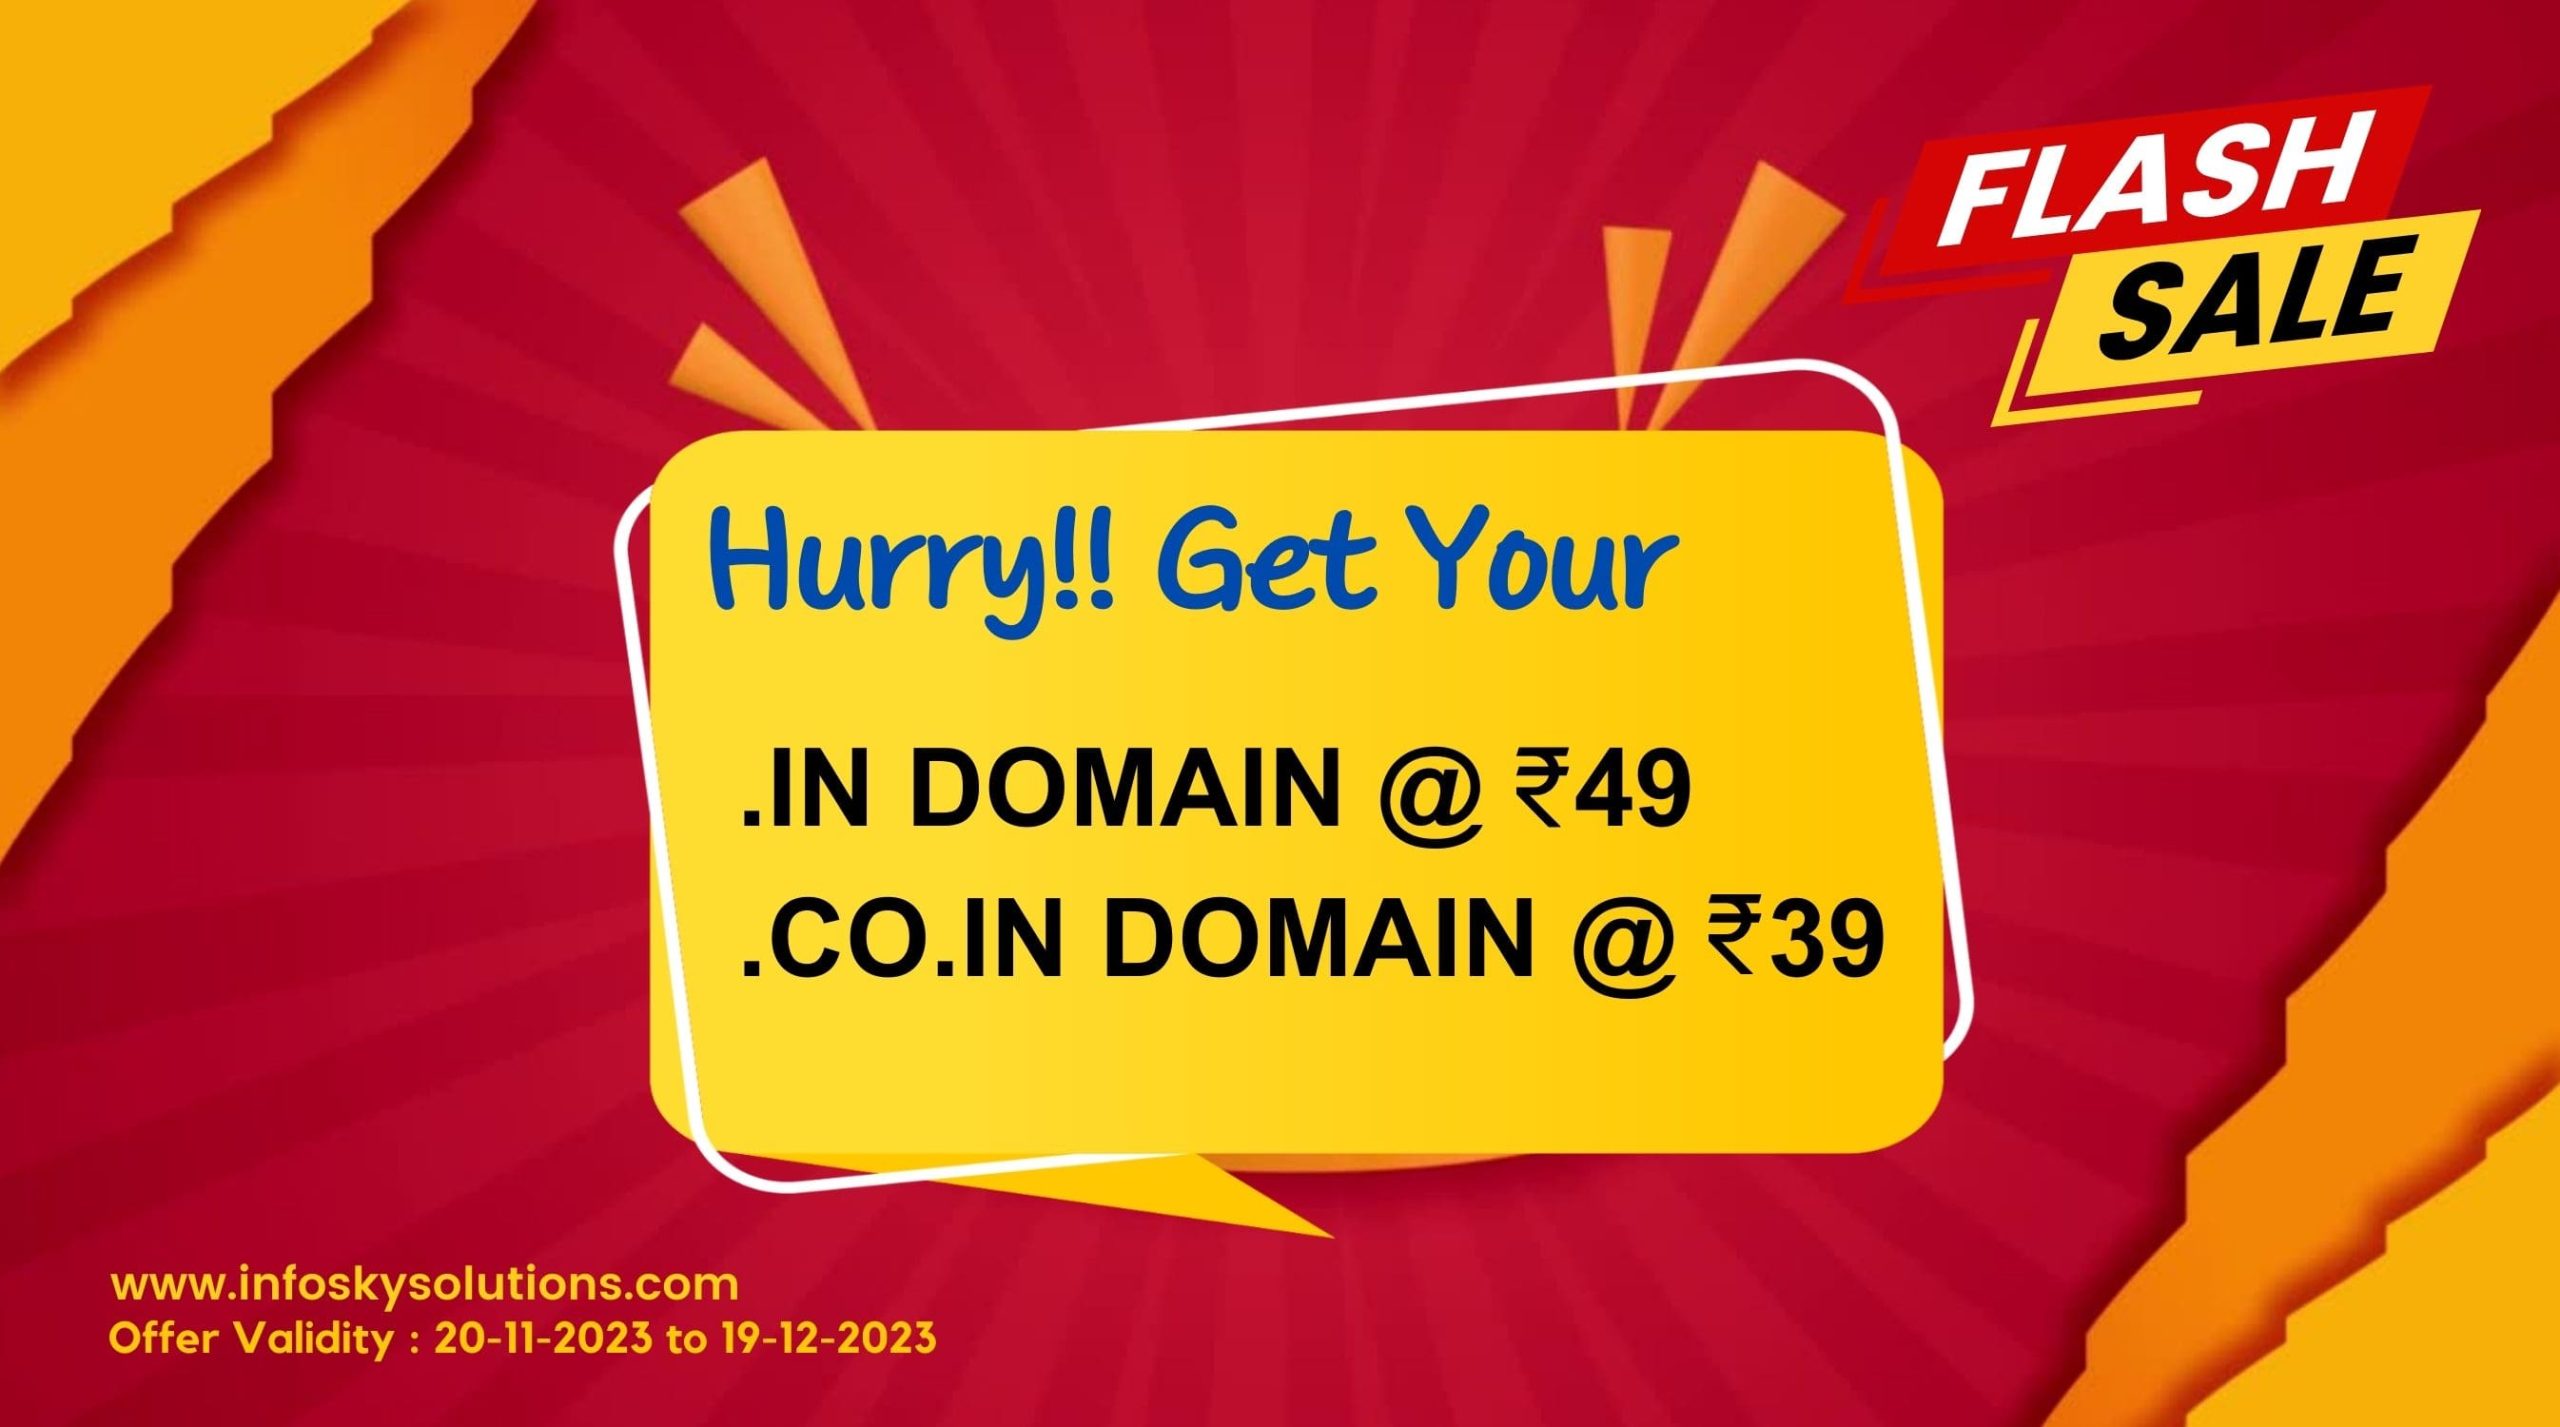  Domain Flash Sale .in Domain RS. 49 and .co.in Domain RS. 39